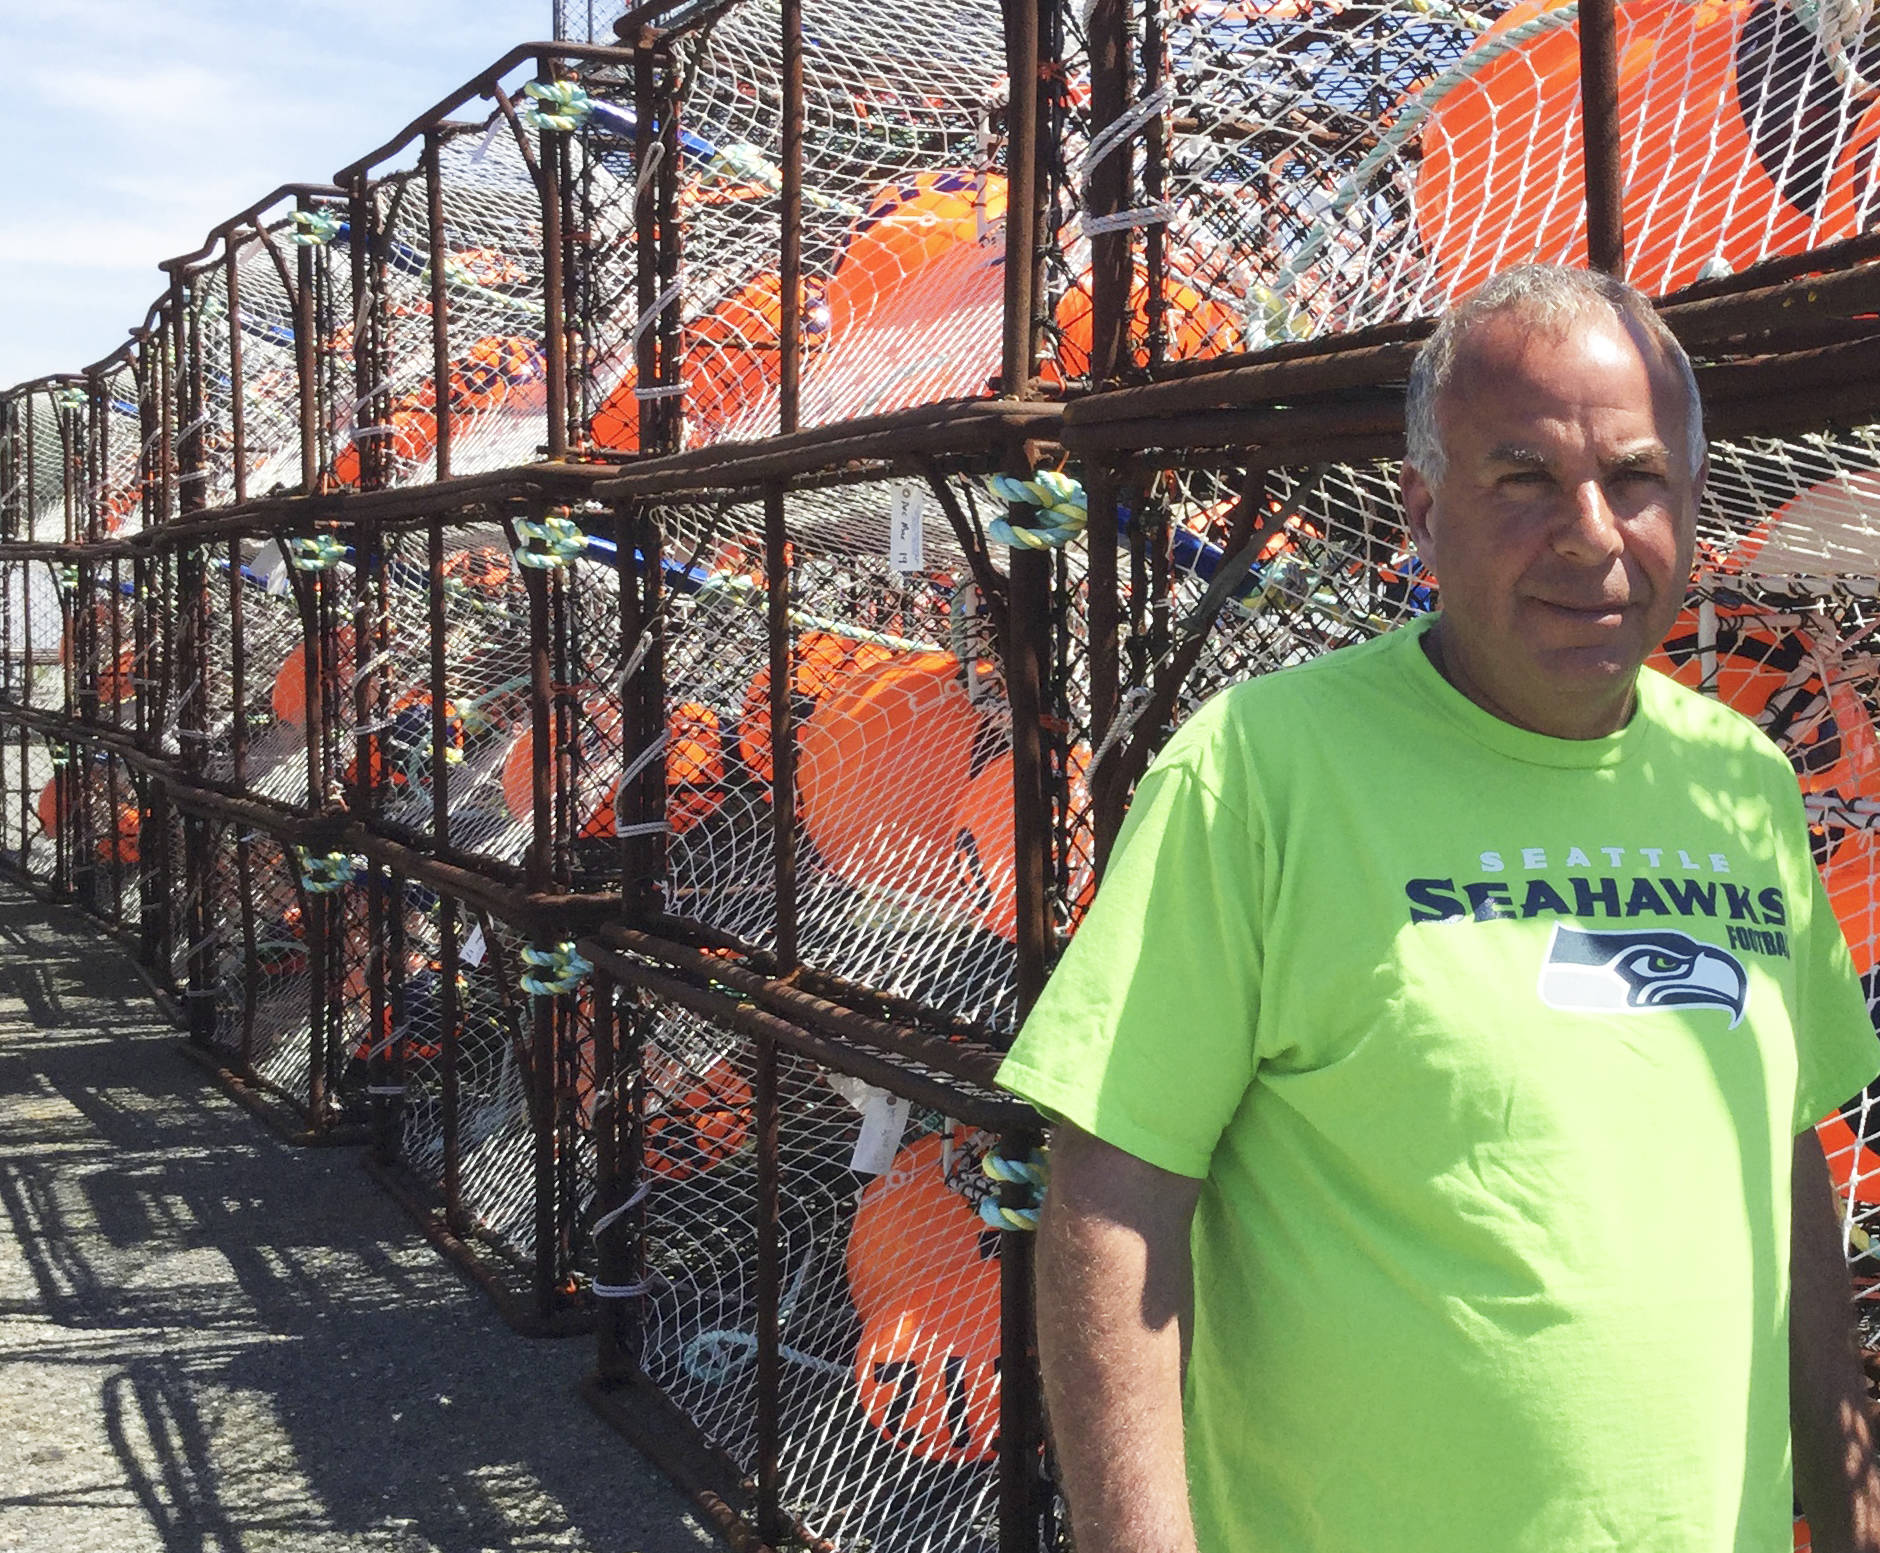 The man who built a better crab trap: Arlington company’s pots stack the decks on reality TV’s ‘Deadliest Catch’